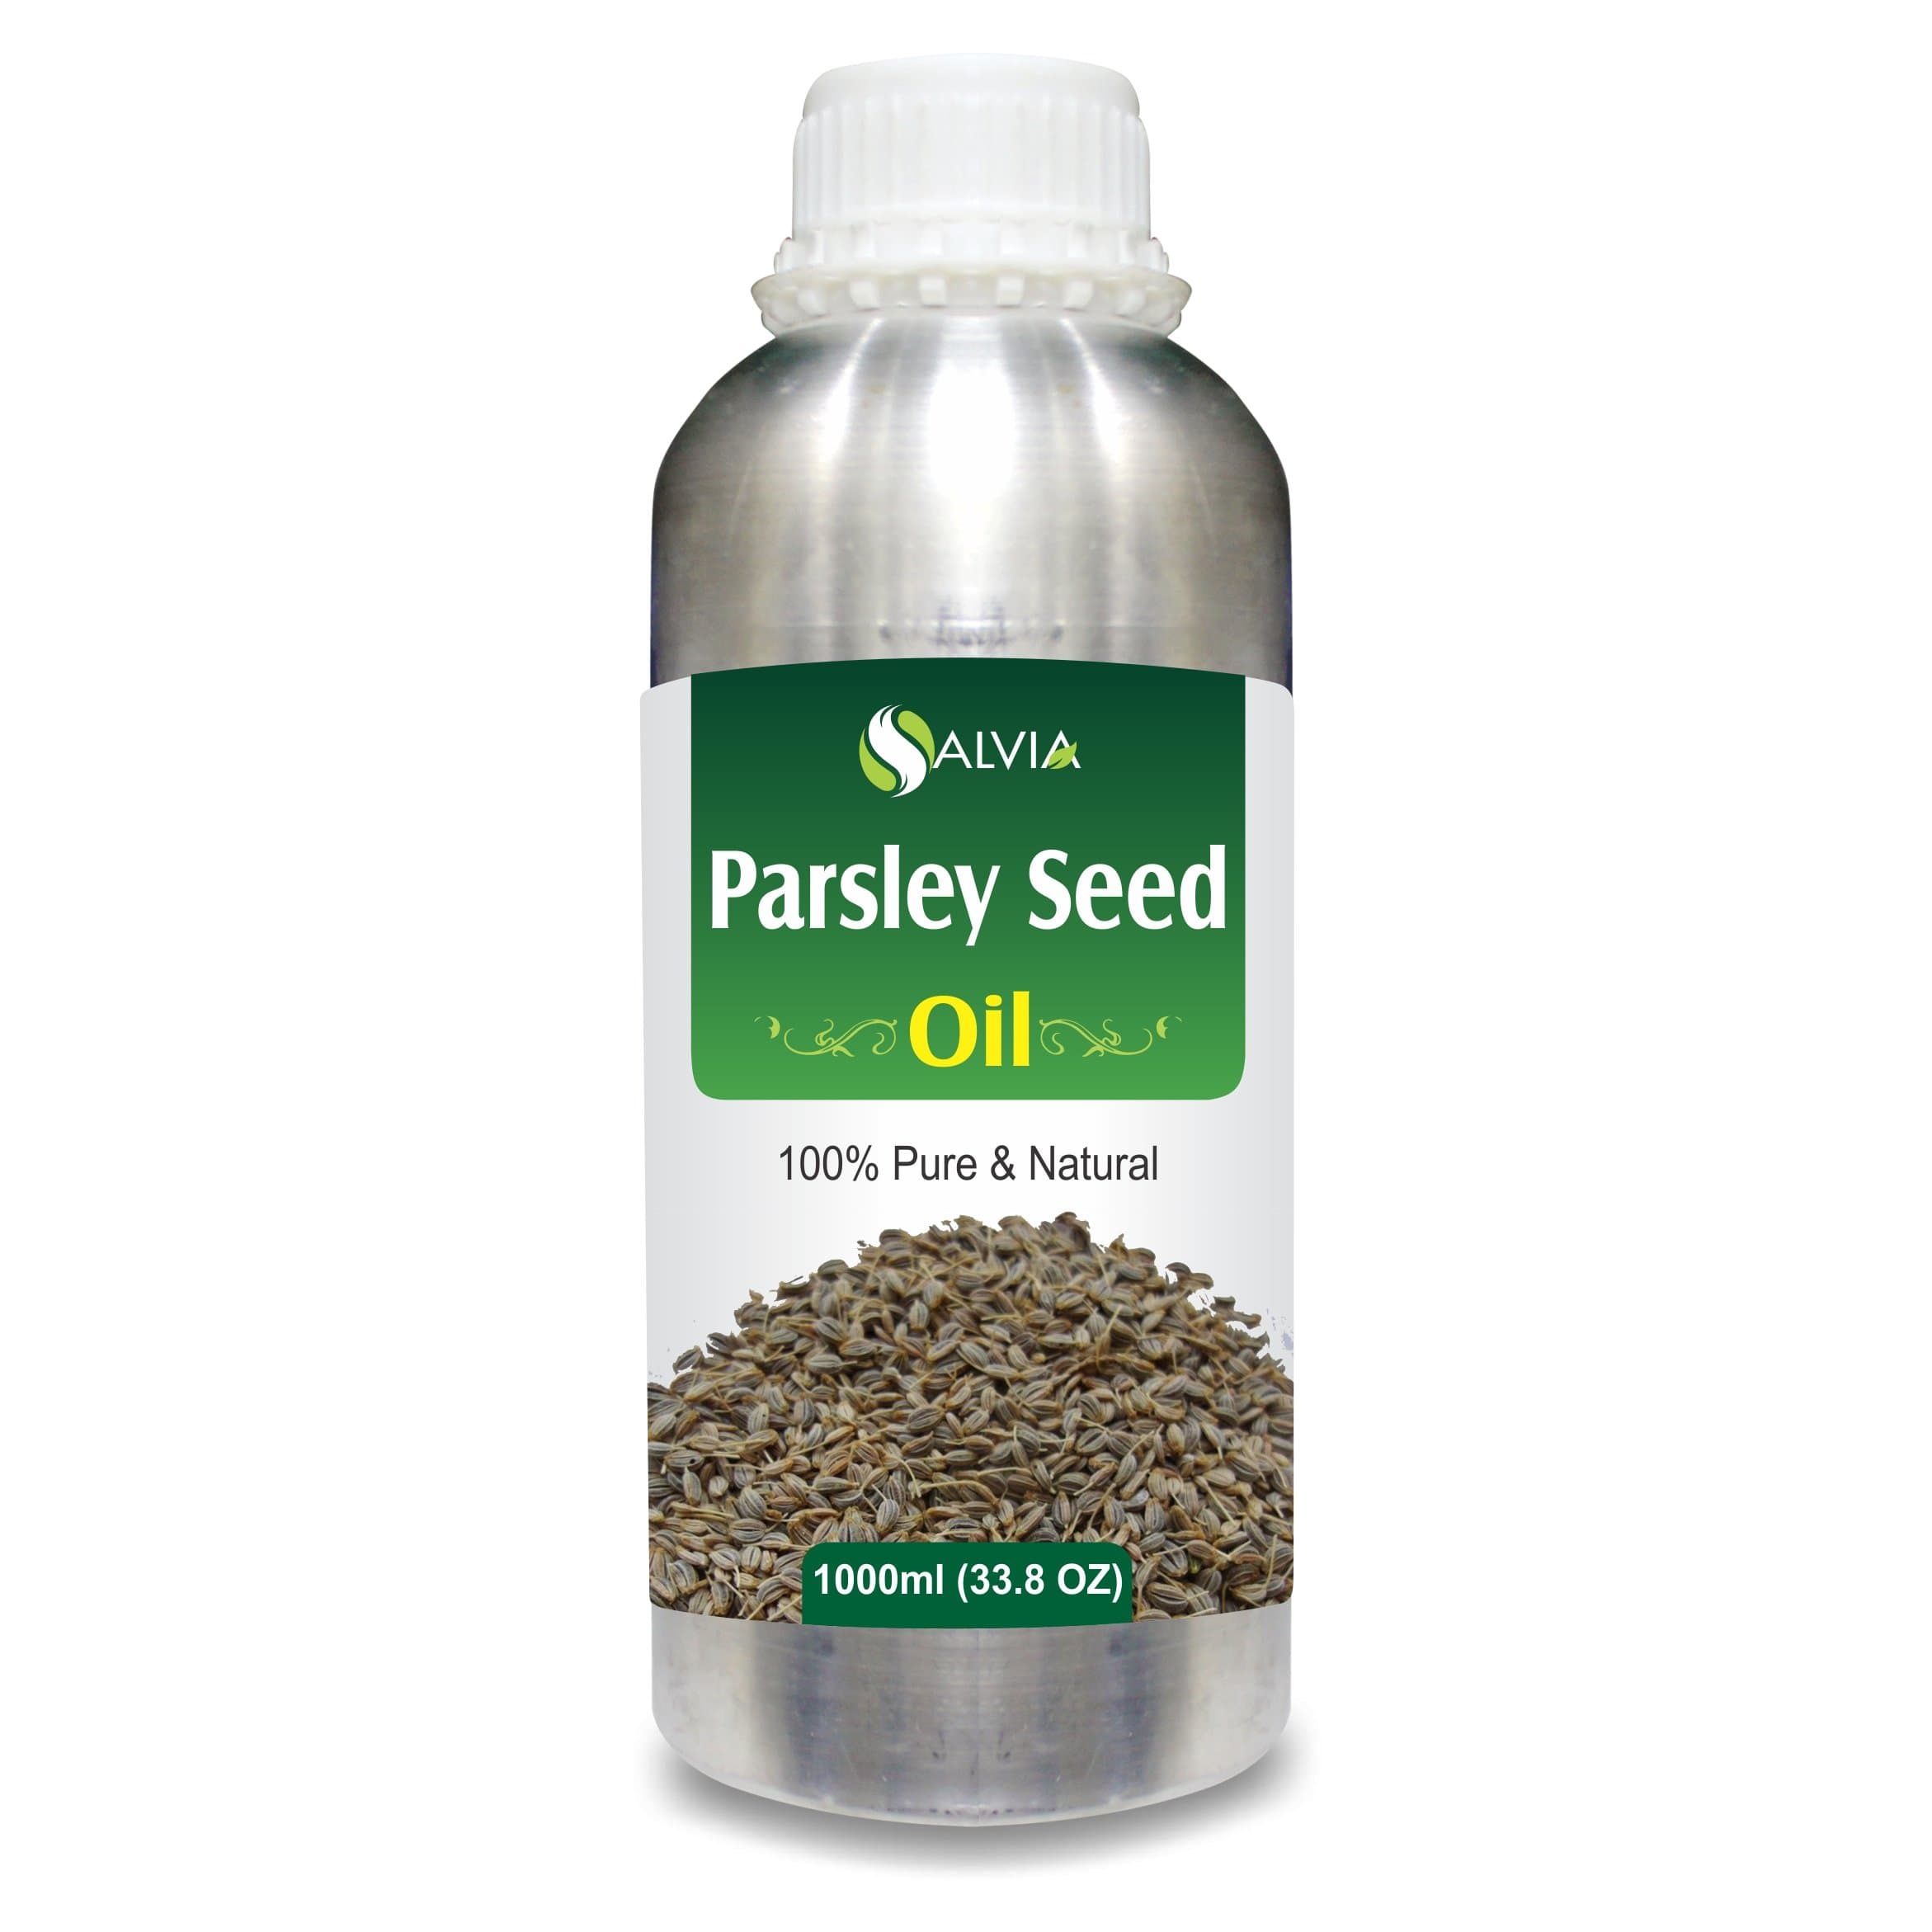 Parsley Seed Oil for hair